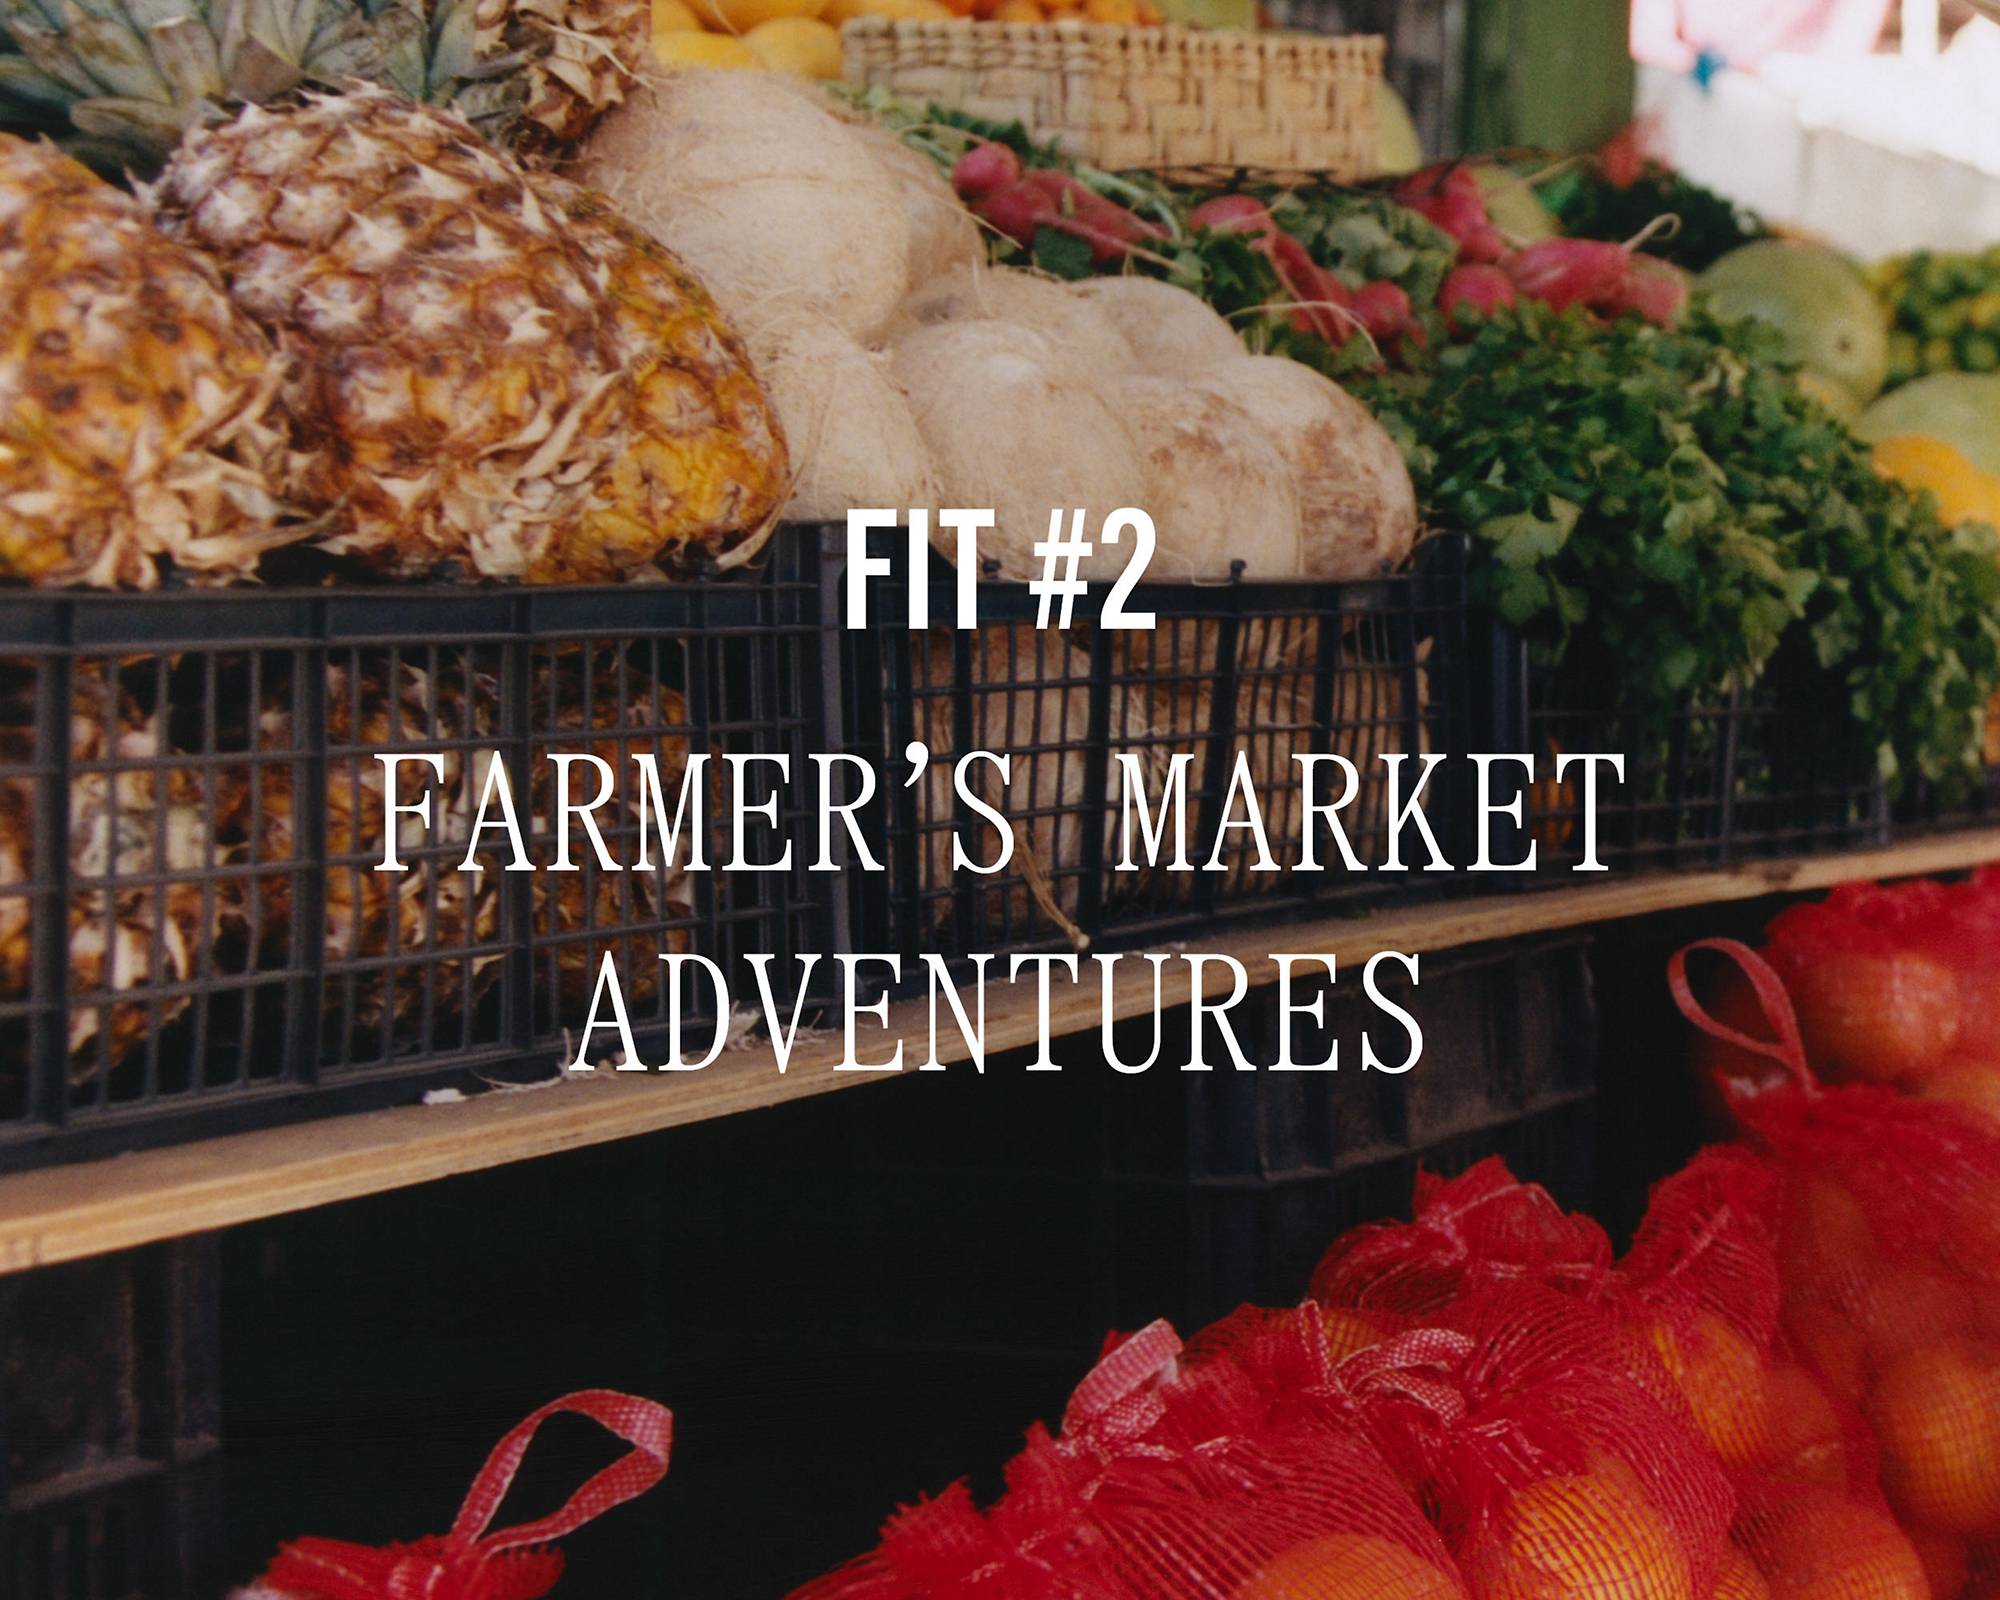 Image of a market with overlaid text "Fit #2 FARMER'S MARKET ADVENTURES"